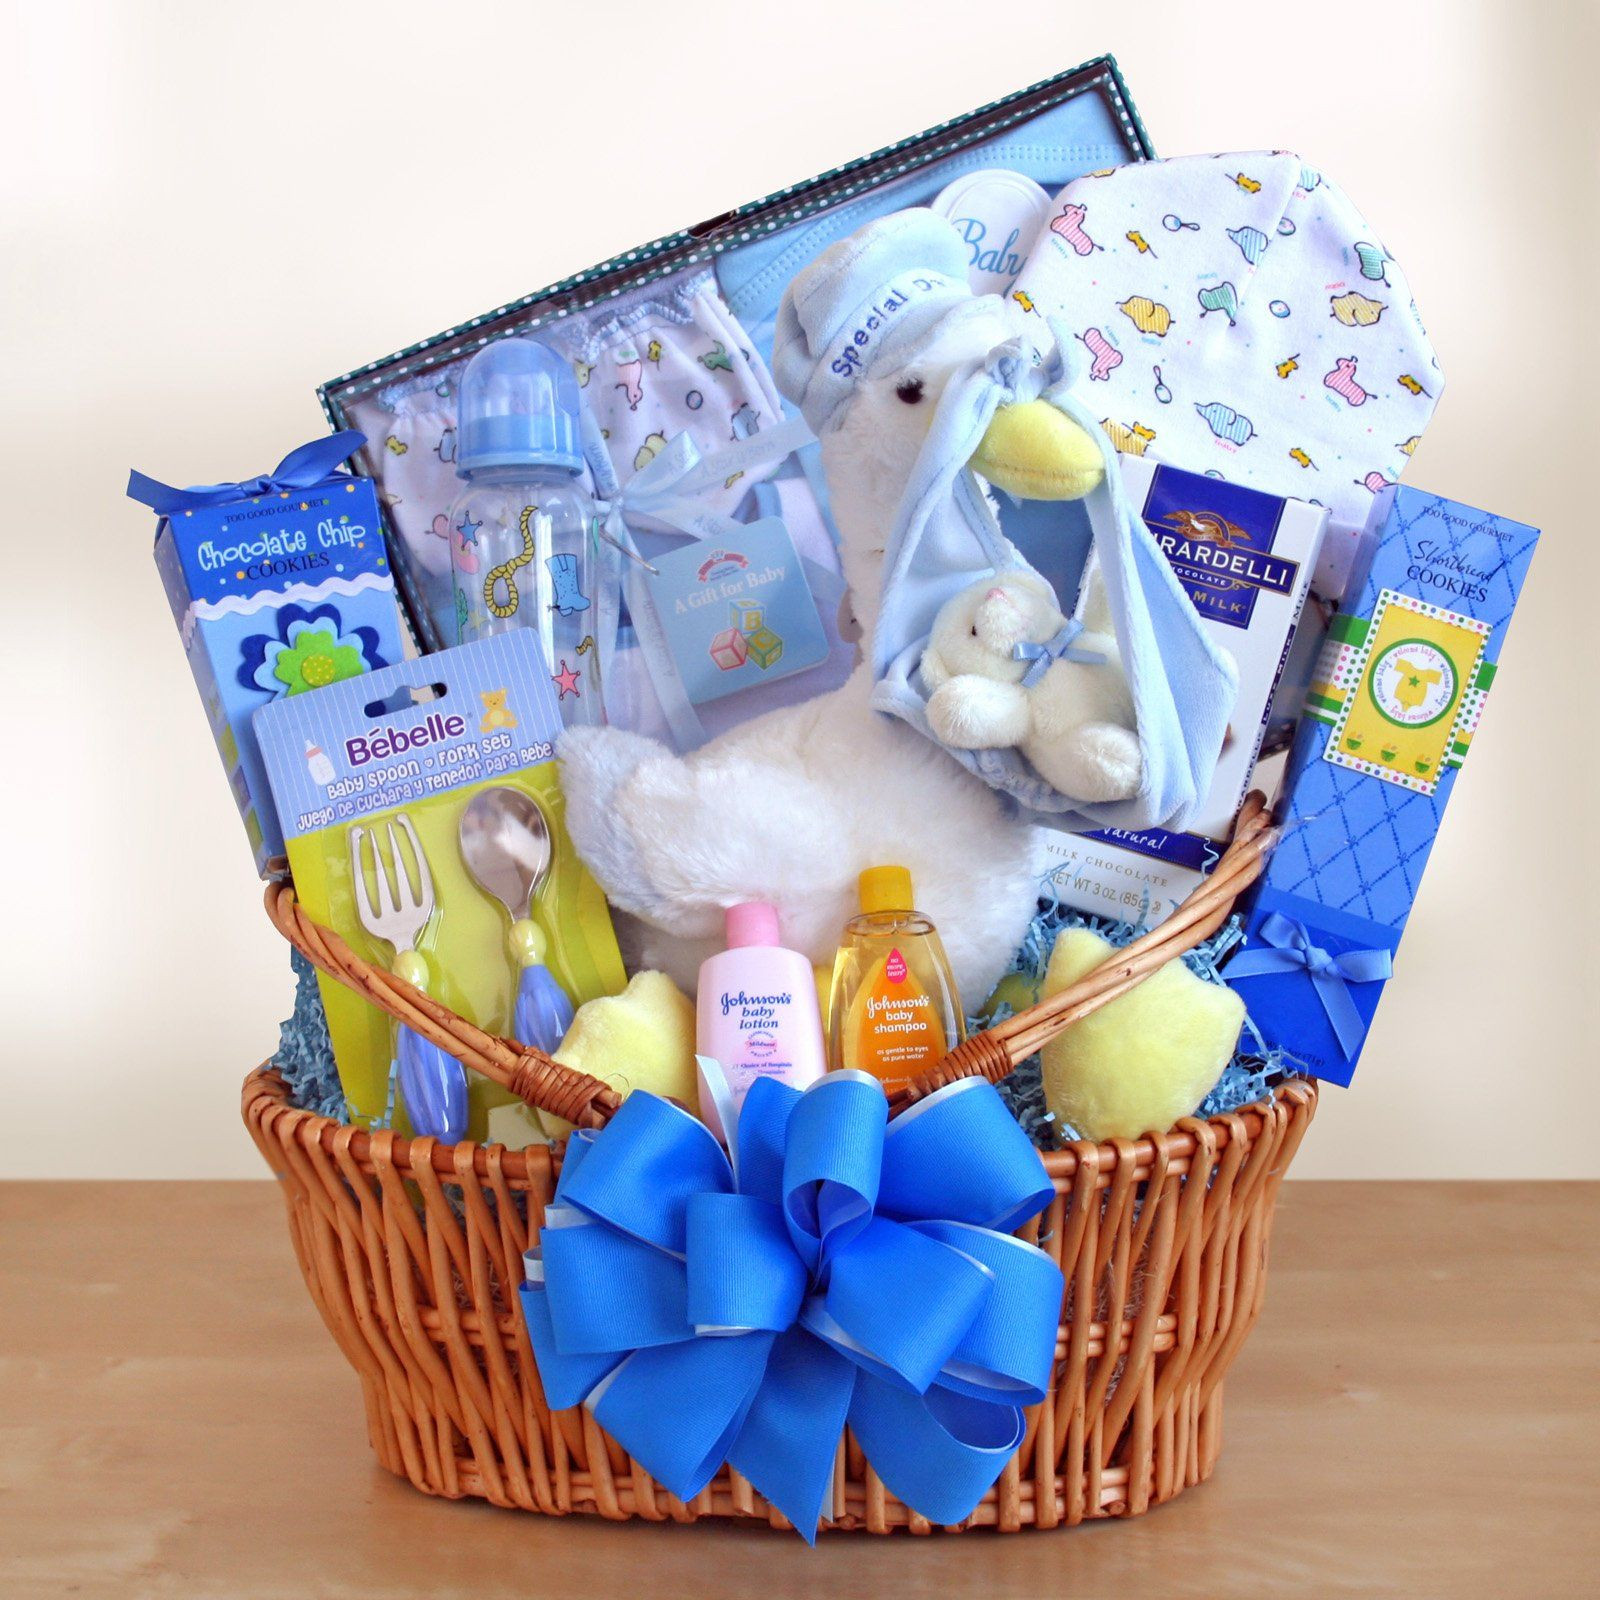 Cute Baby Gifts For Boy
 Special Stork Delivery Baby Boy Gift Basket